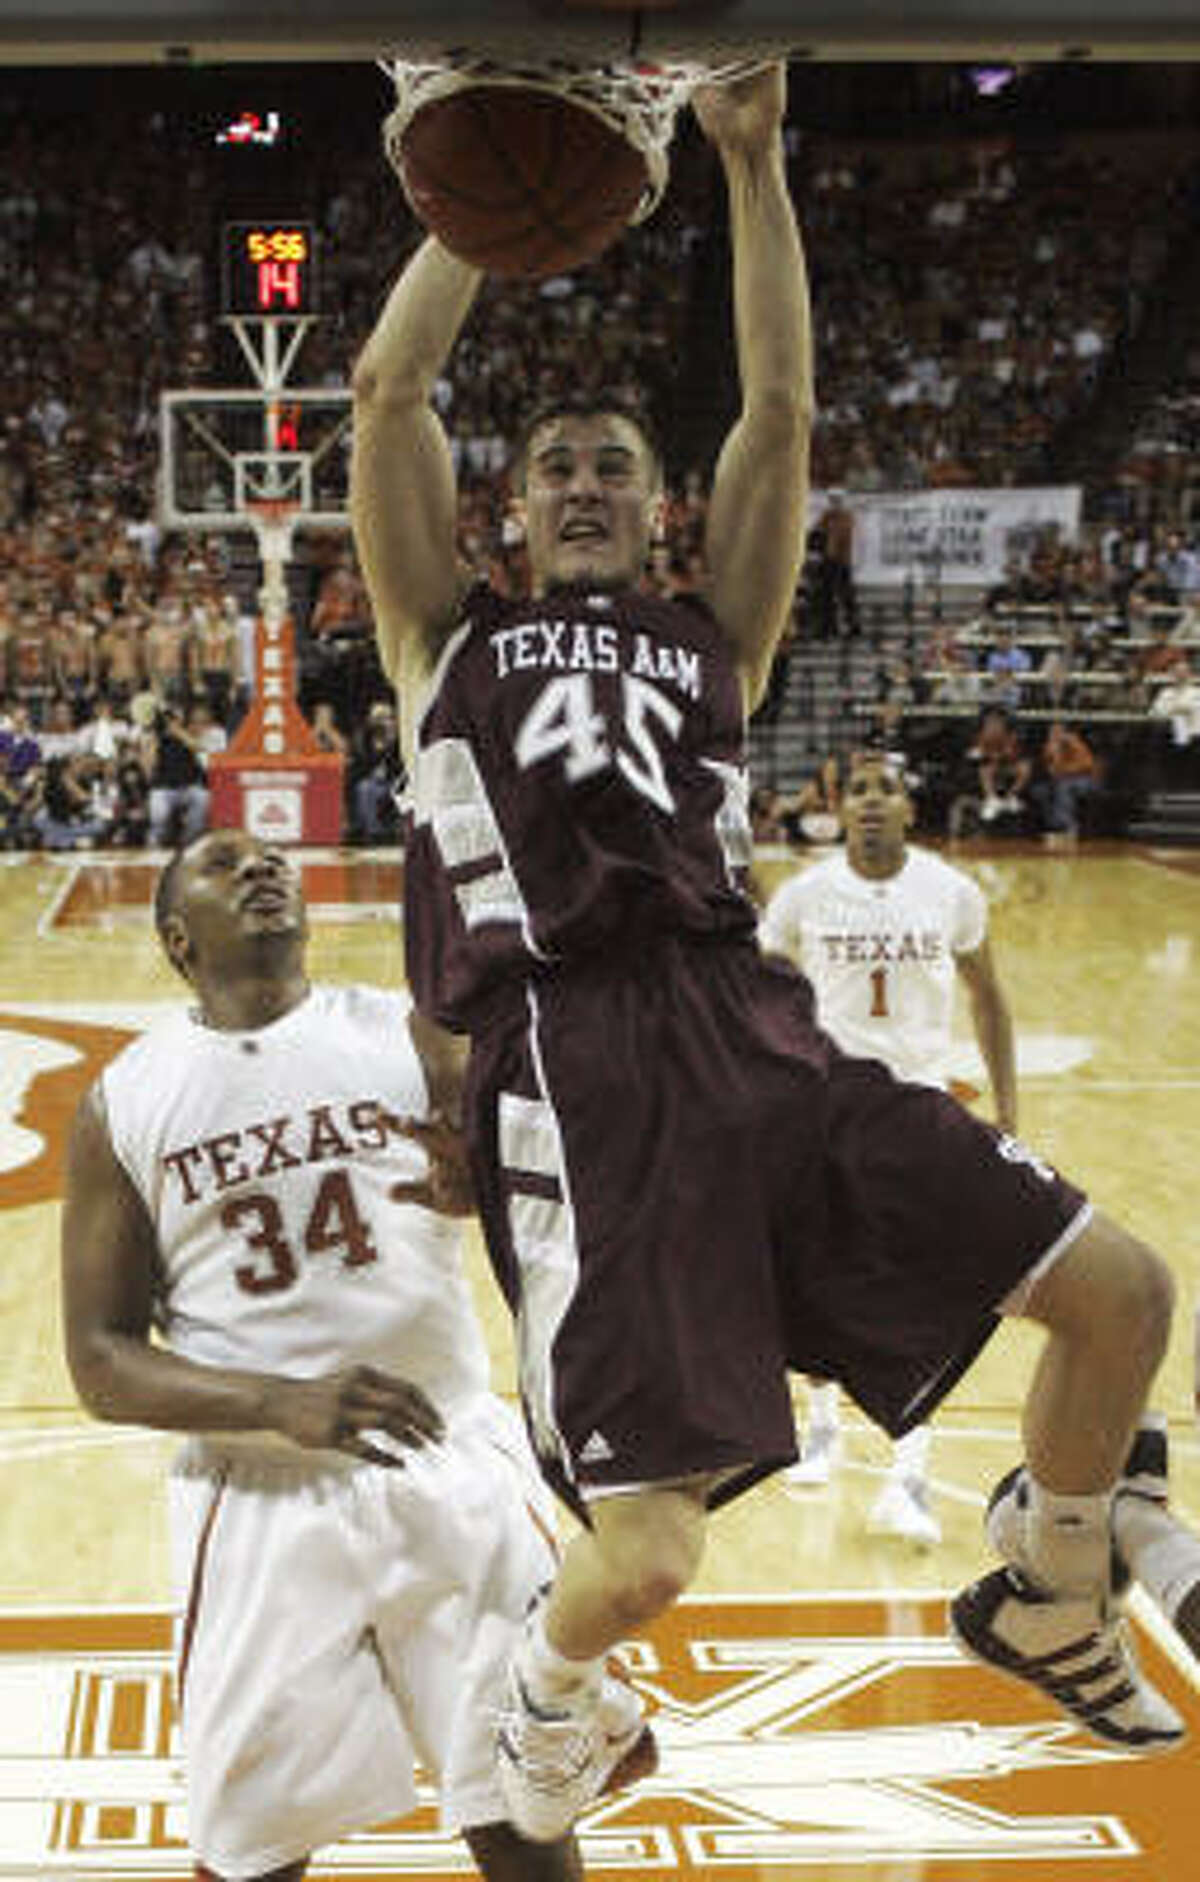 Texas A&M forward Nathan Walkup dunks in front of Texas center Dexter Pittman during the first half of Saturday's matchup in Austin.